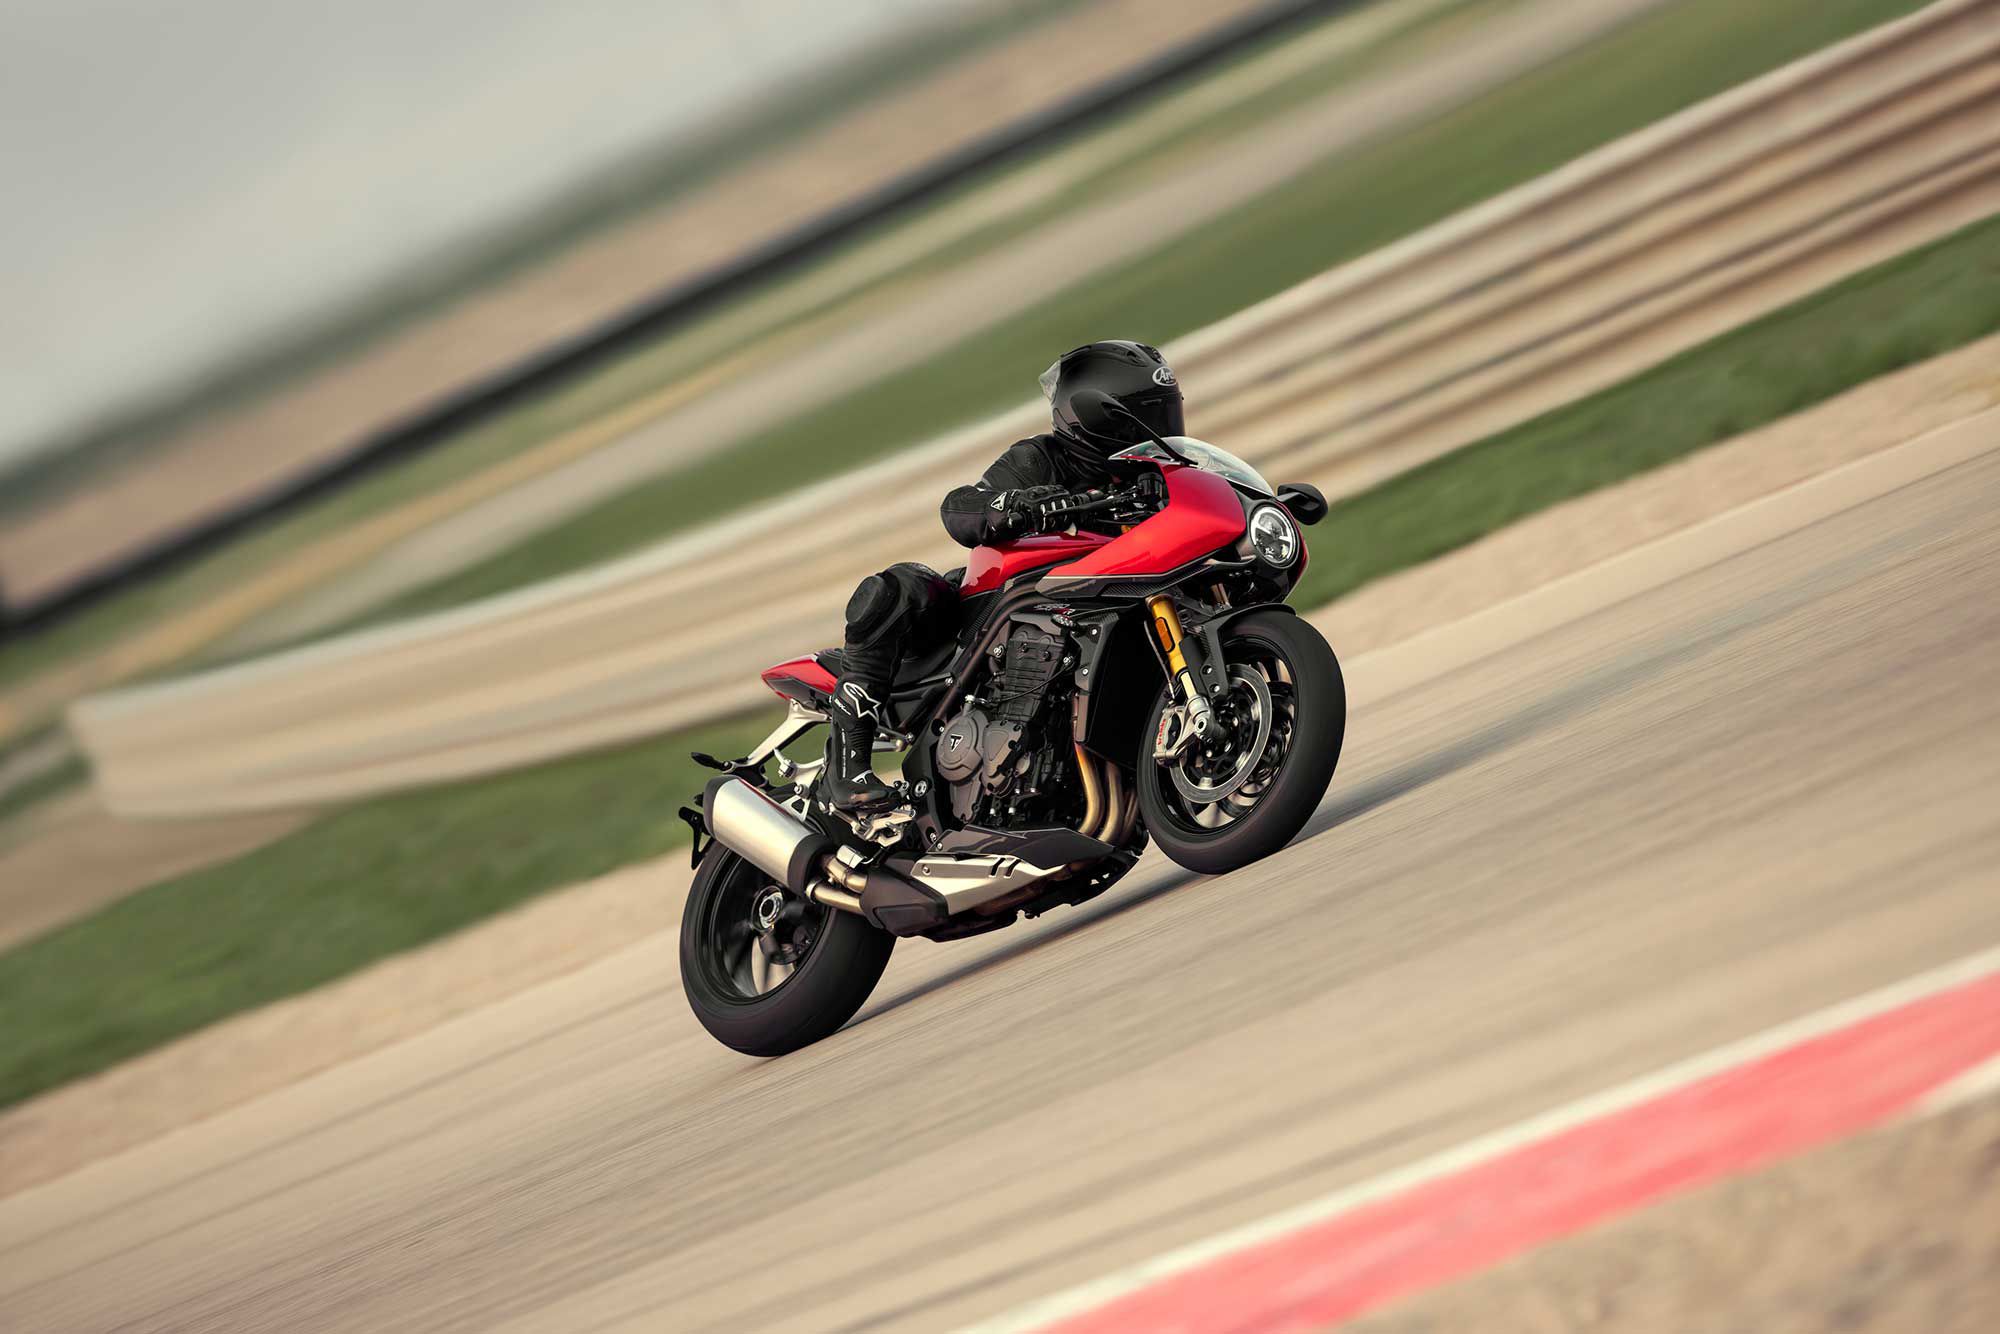 With power and pull throughout the rev range, the new Speed Triple 1200 RR promises to be a blast at the track.